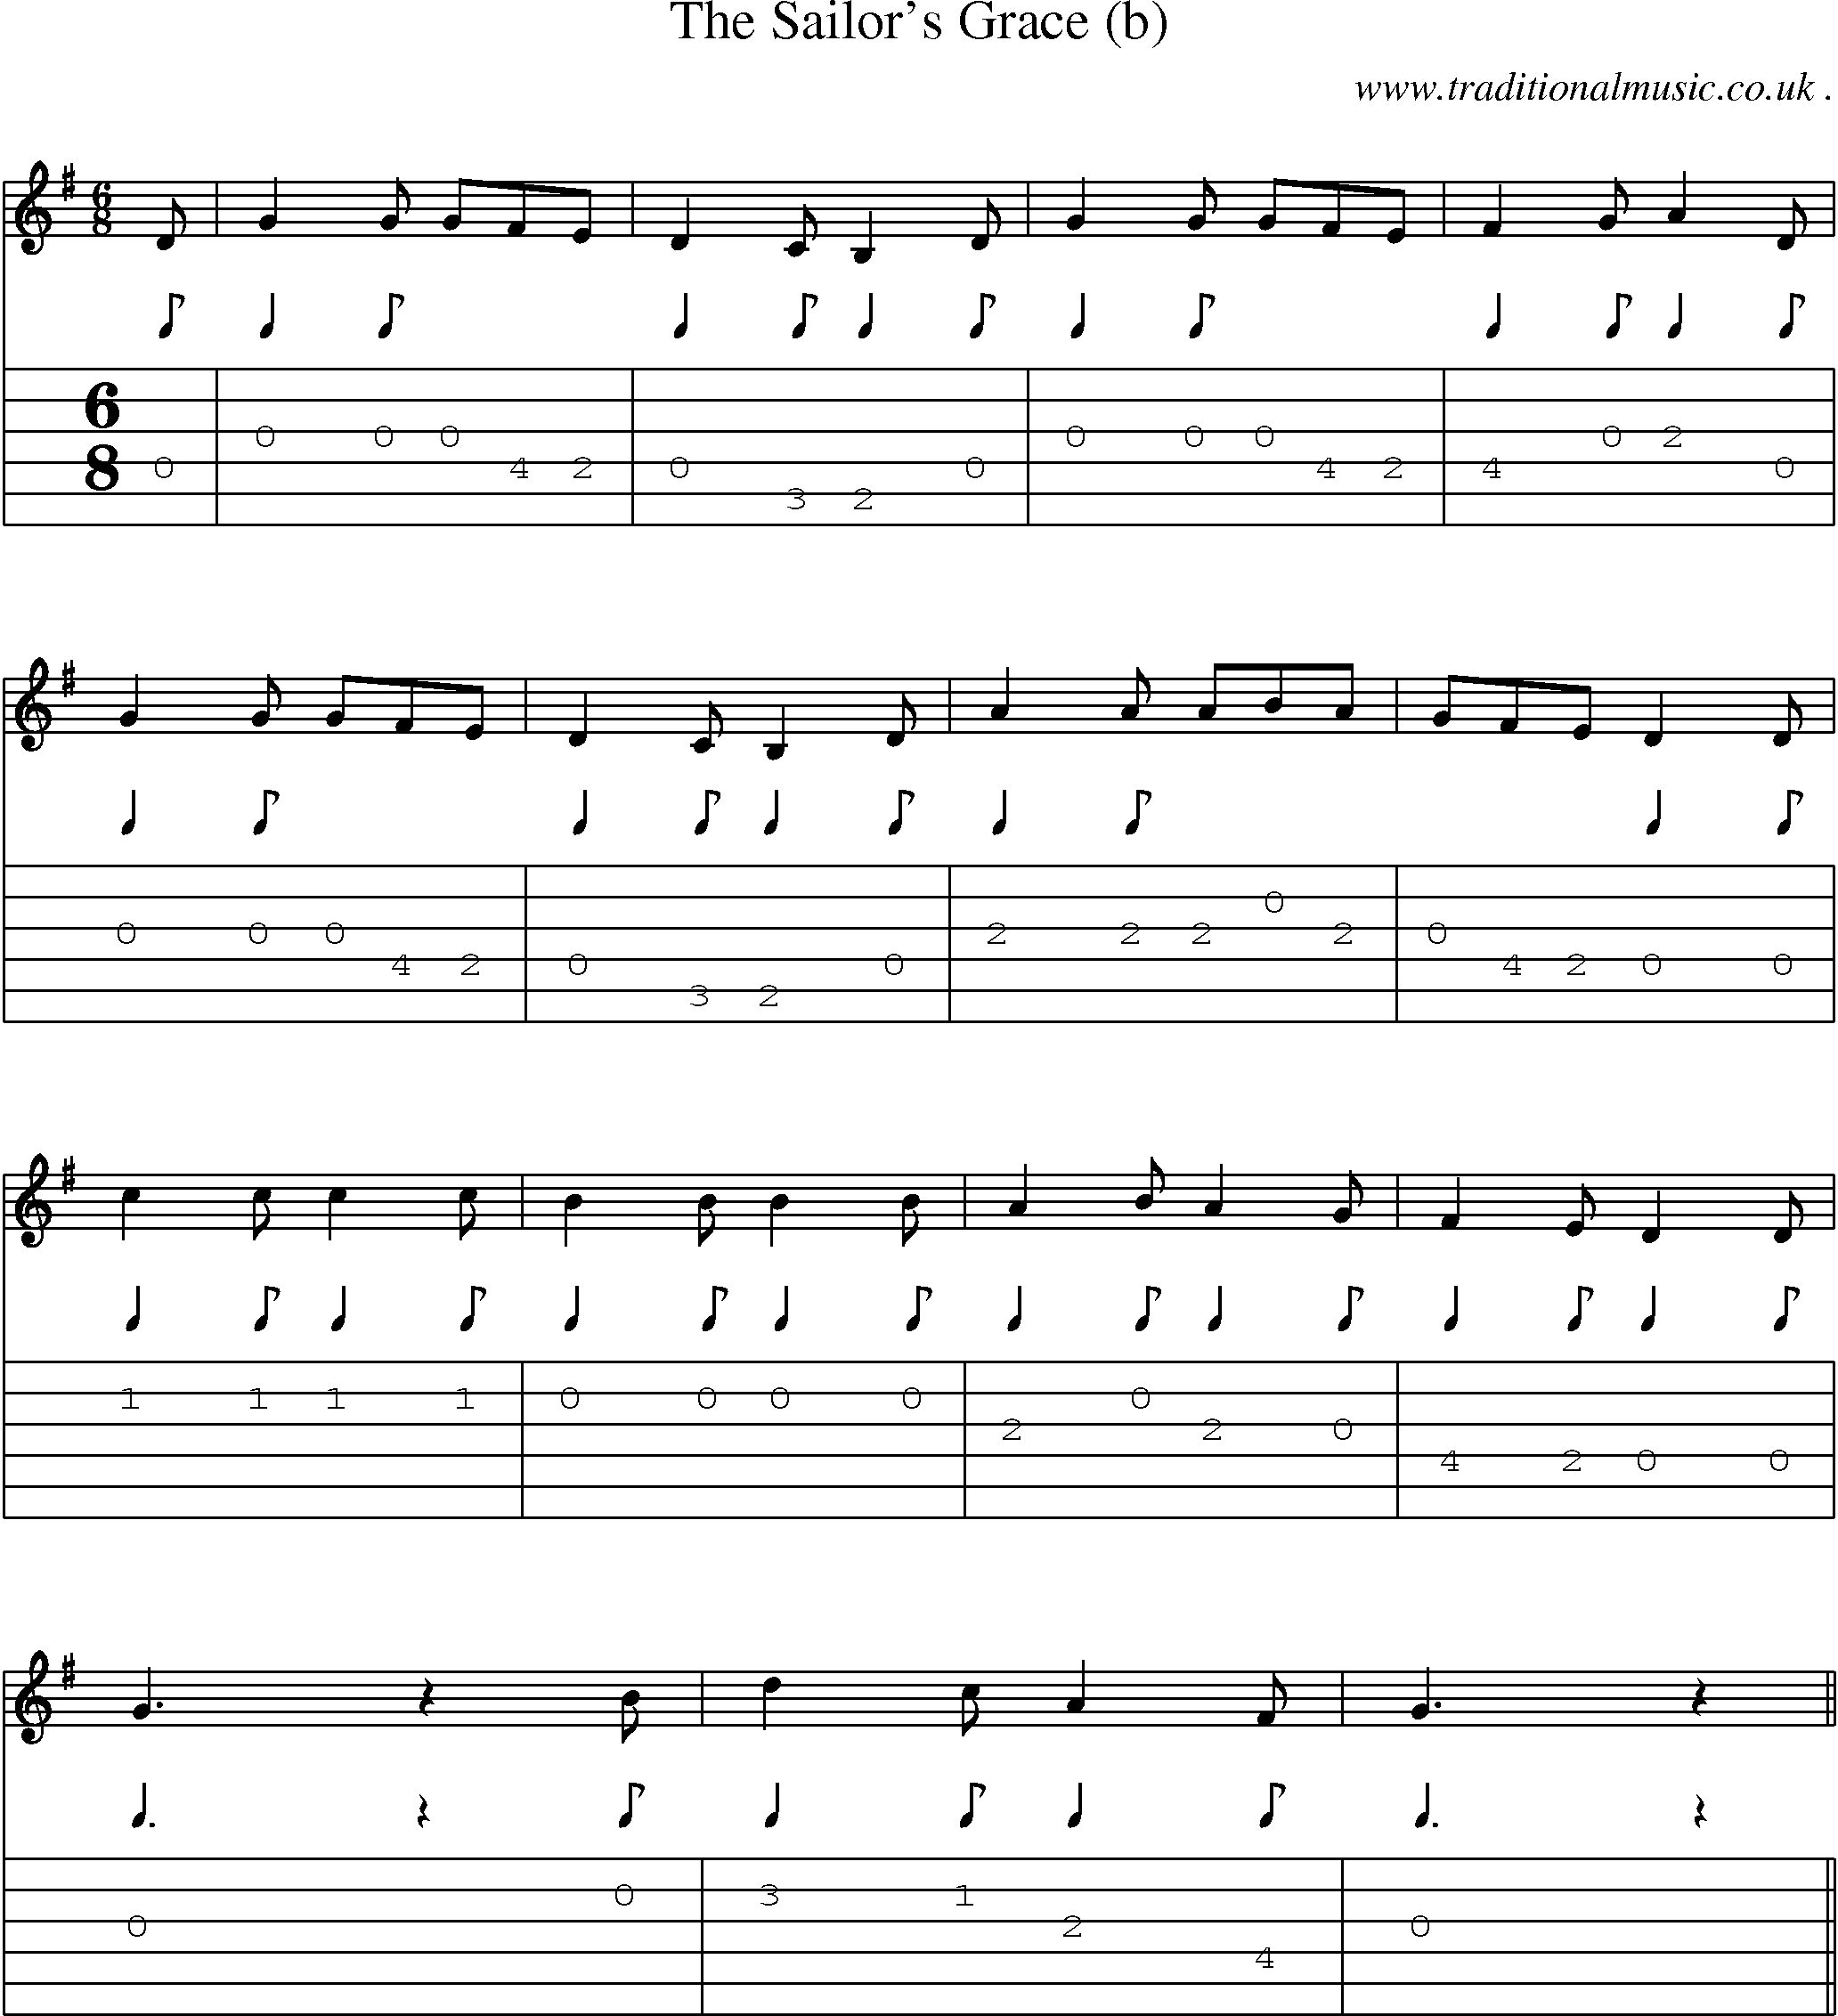 Sheet-Music and Guitar Tabs for The Sailors Grace (b)